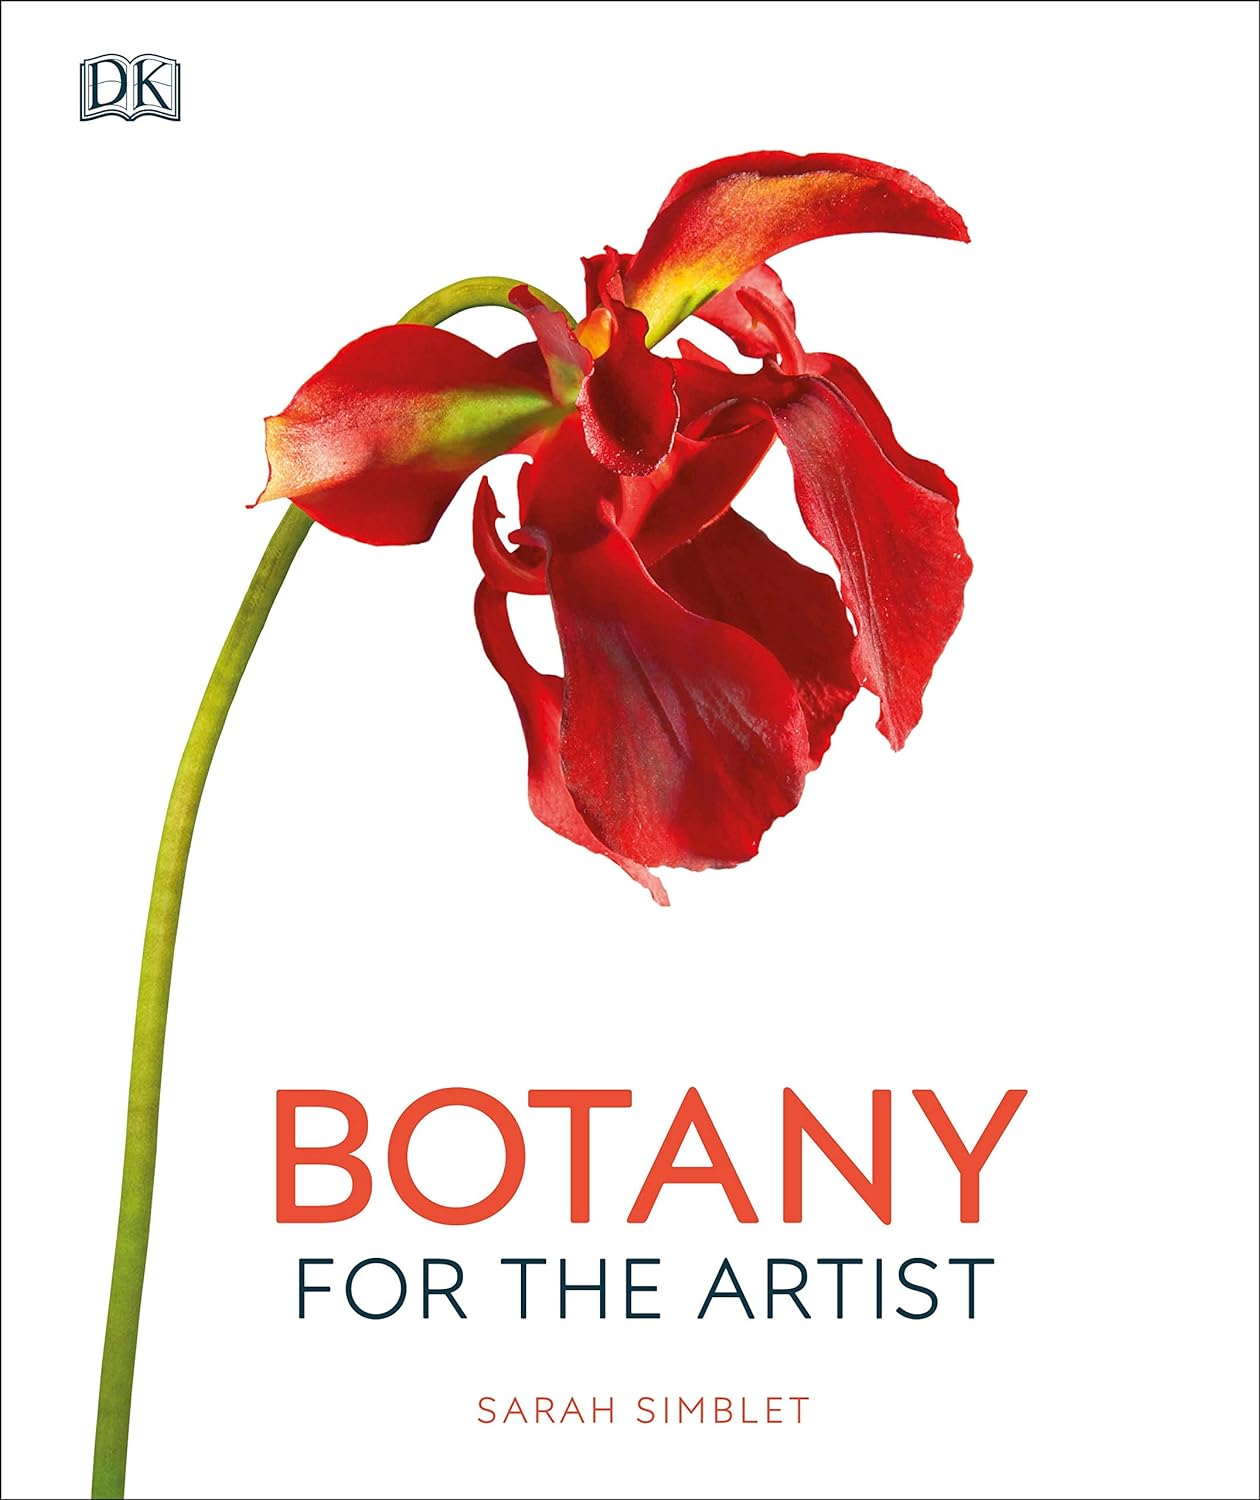 Botany for the Artist by Sarah Simblet